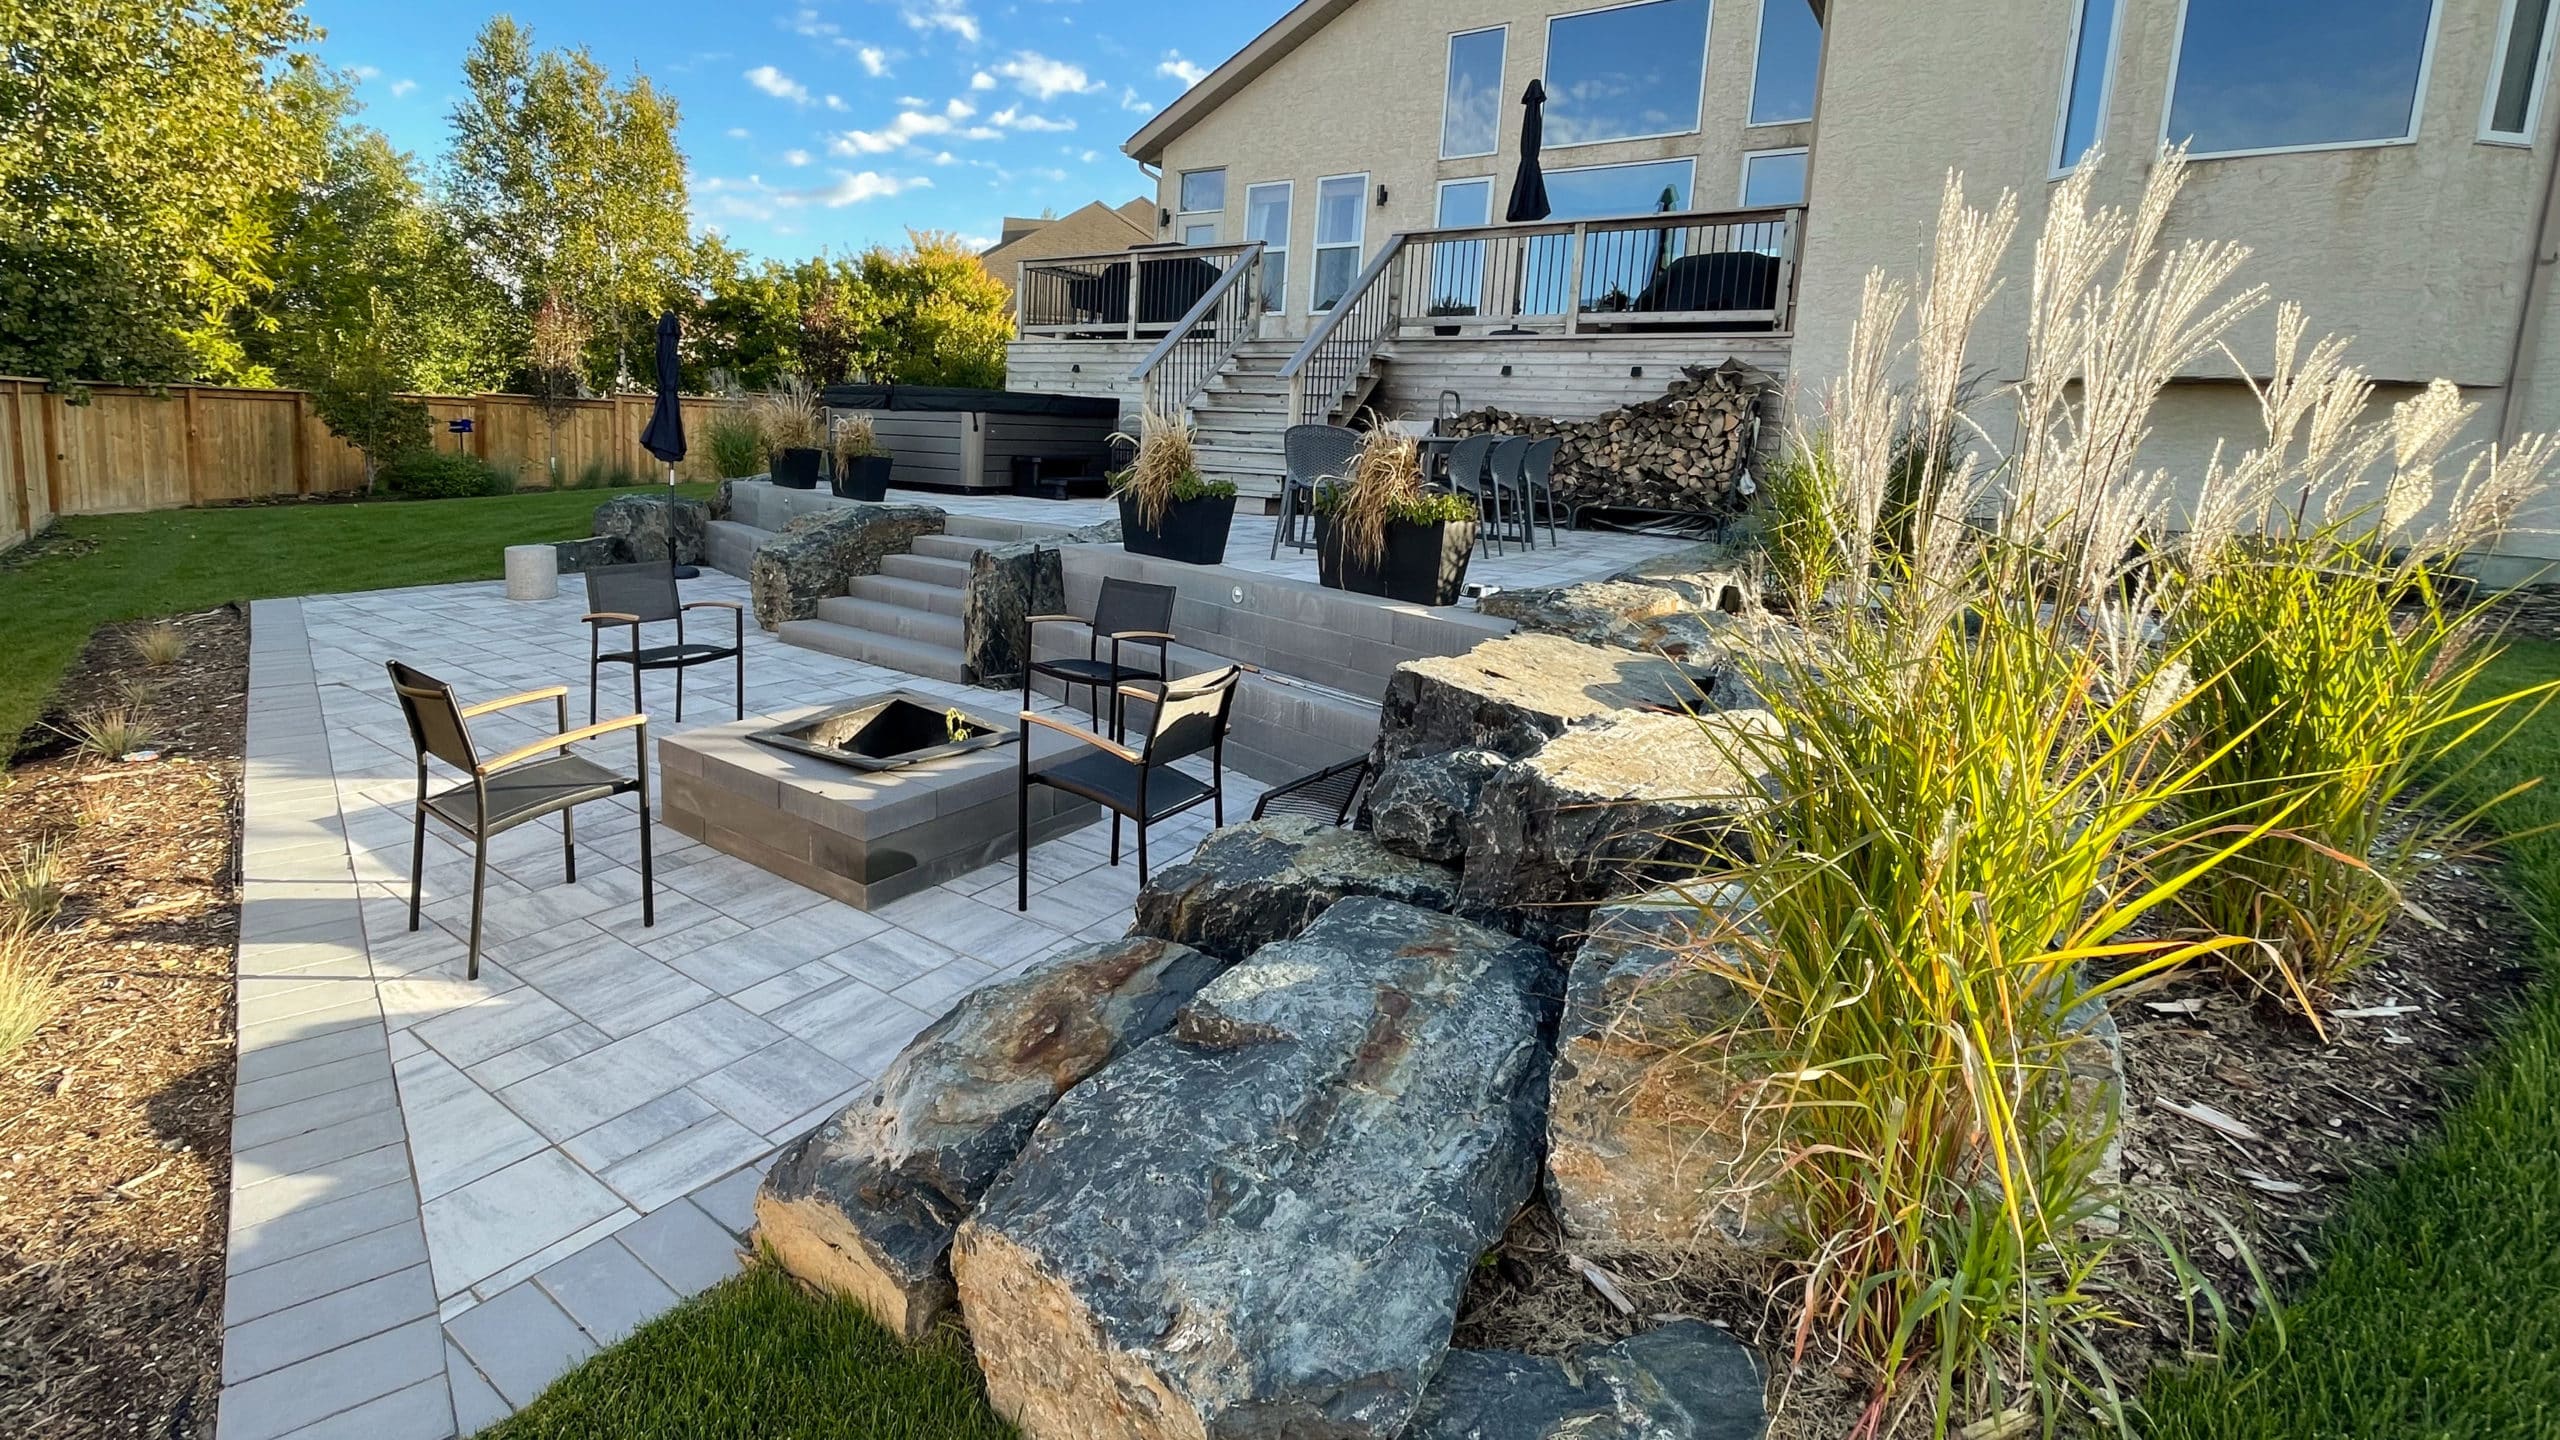 Winnipeg landscaped backyard, with stone patio & fire pit, elevated deck, rock features, planting beds and wooden fence.